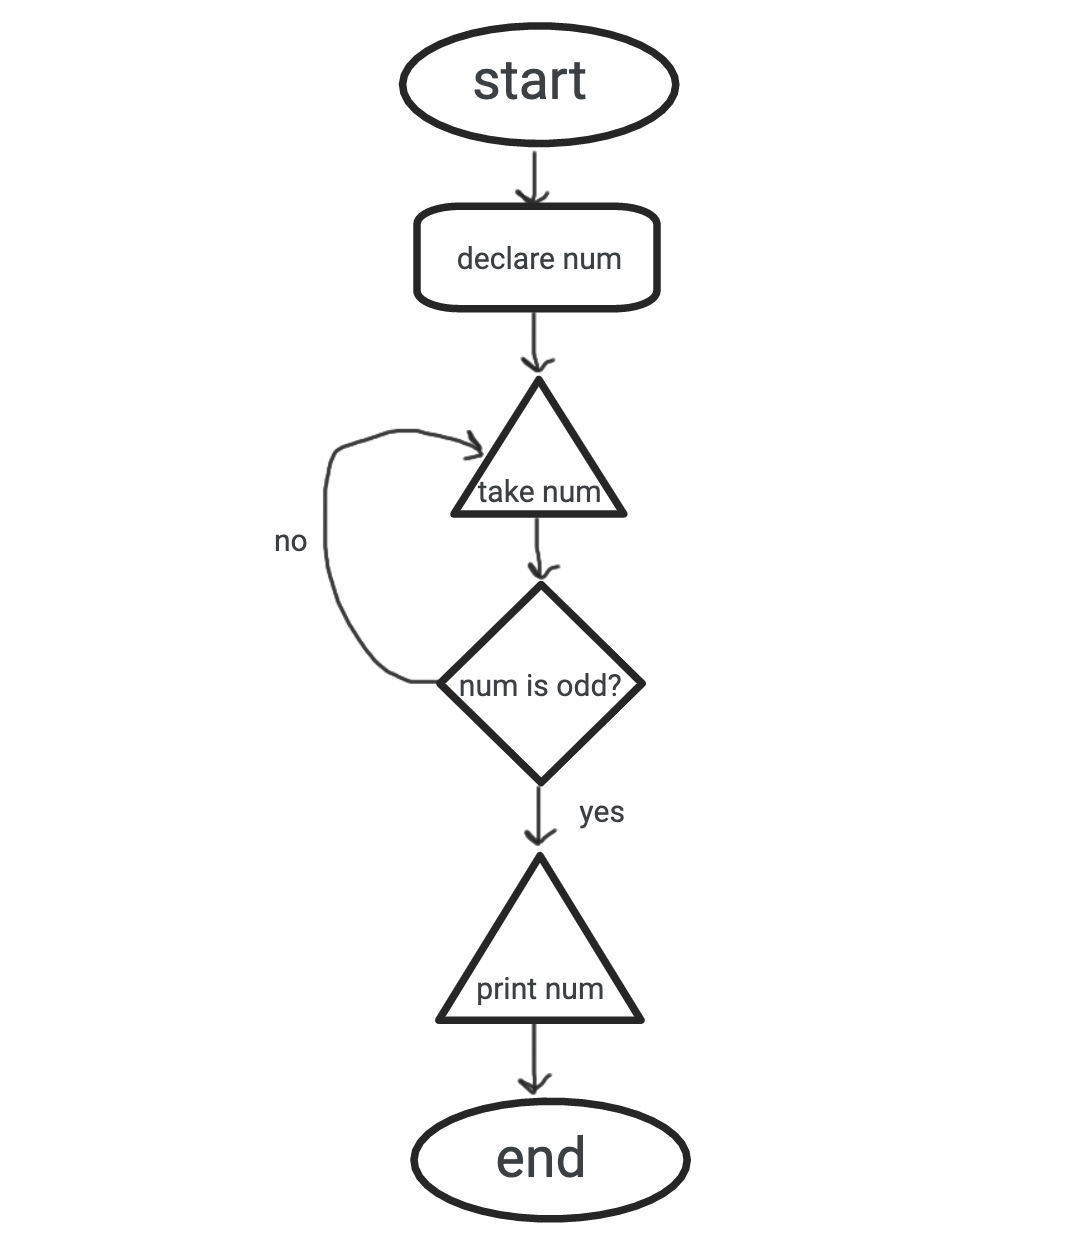 Flowchart with "start" that leads to "declare num" that leads to "take num" that leads to "num is odd?" that leads to "print num" if yes or loops back to "take num" if no. "print num" then leads to "end".